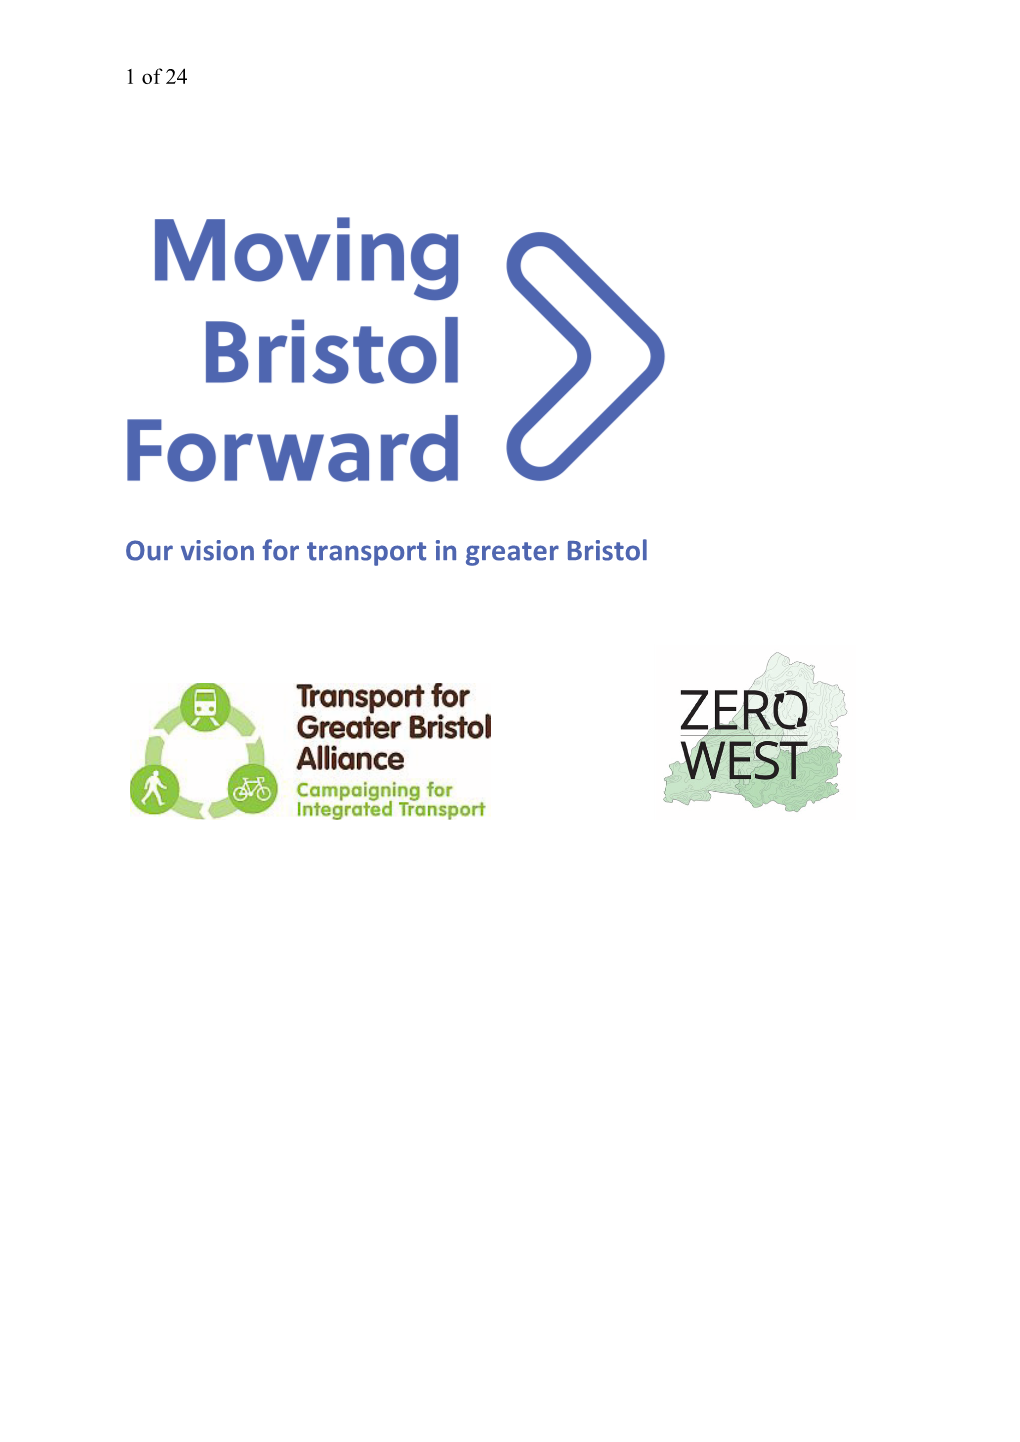 Our Vision for Transport in Greater Bristol